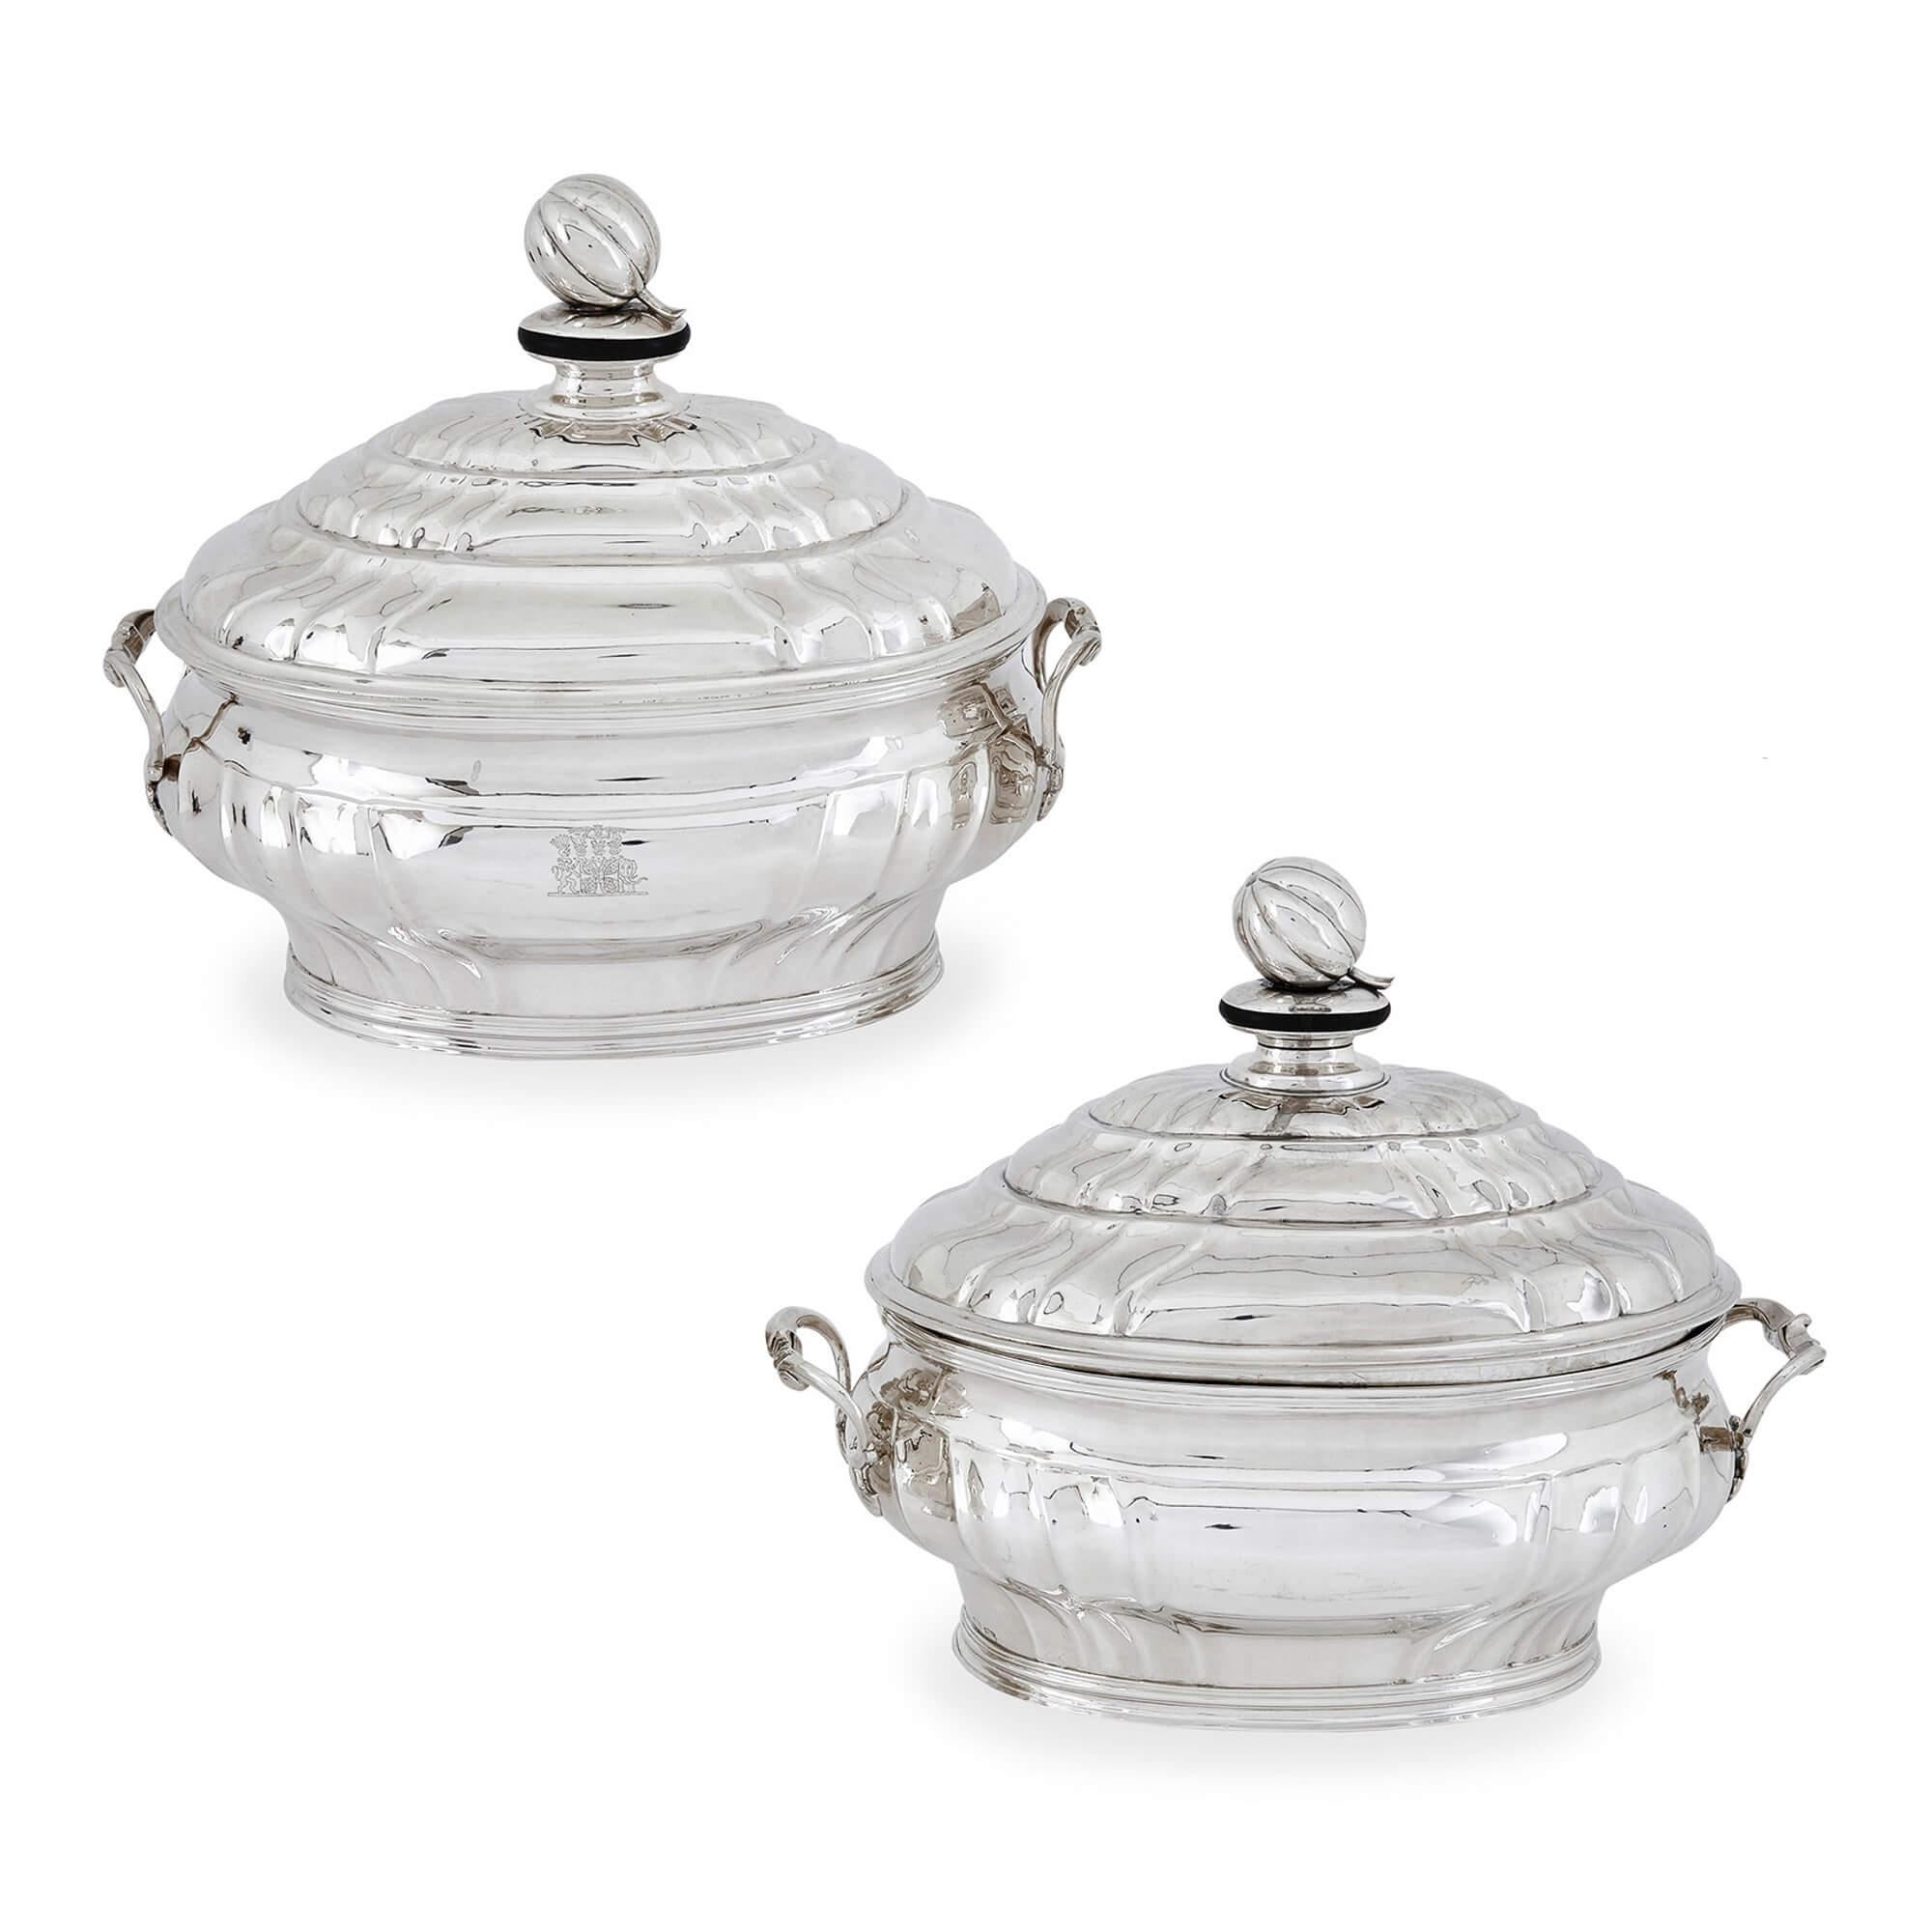 Pair of rare Danish eighteenth-century silver soup tureens with trays
Danish, 1750
Tureens: height 27cm, width 33cm, depth 20cm
Trays: height 6cm, width 45cm, depth 28cm

The superb tureens in this pair were crafted in Denmark during the